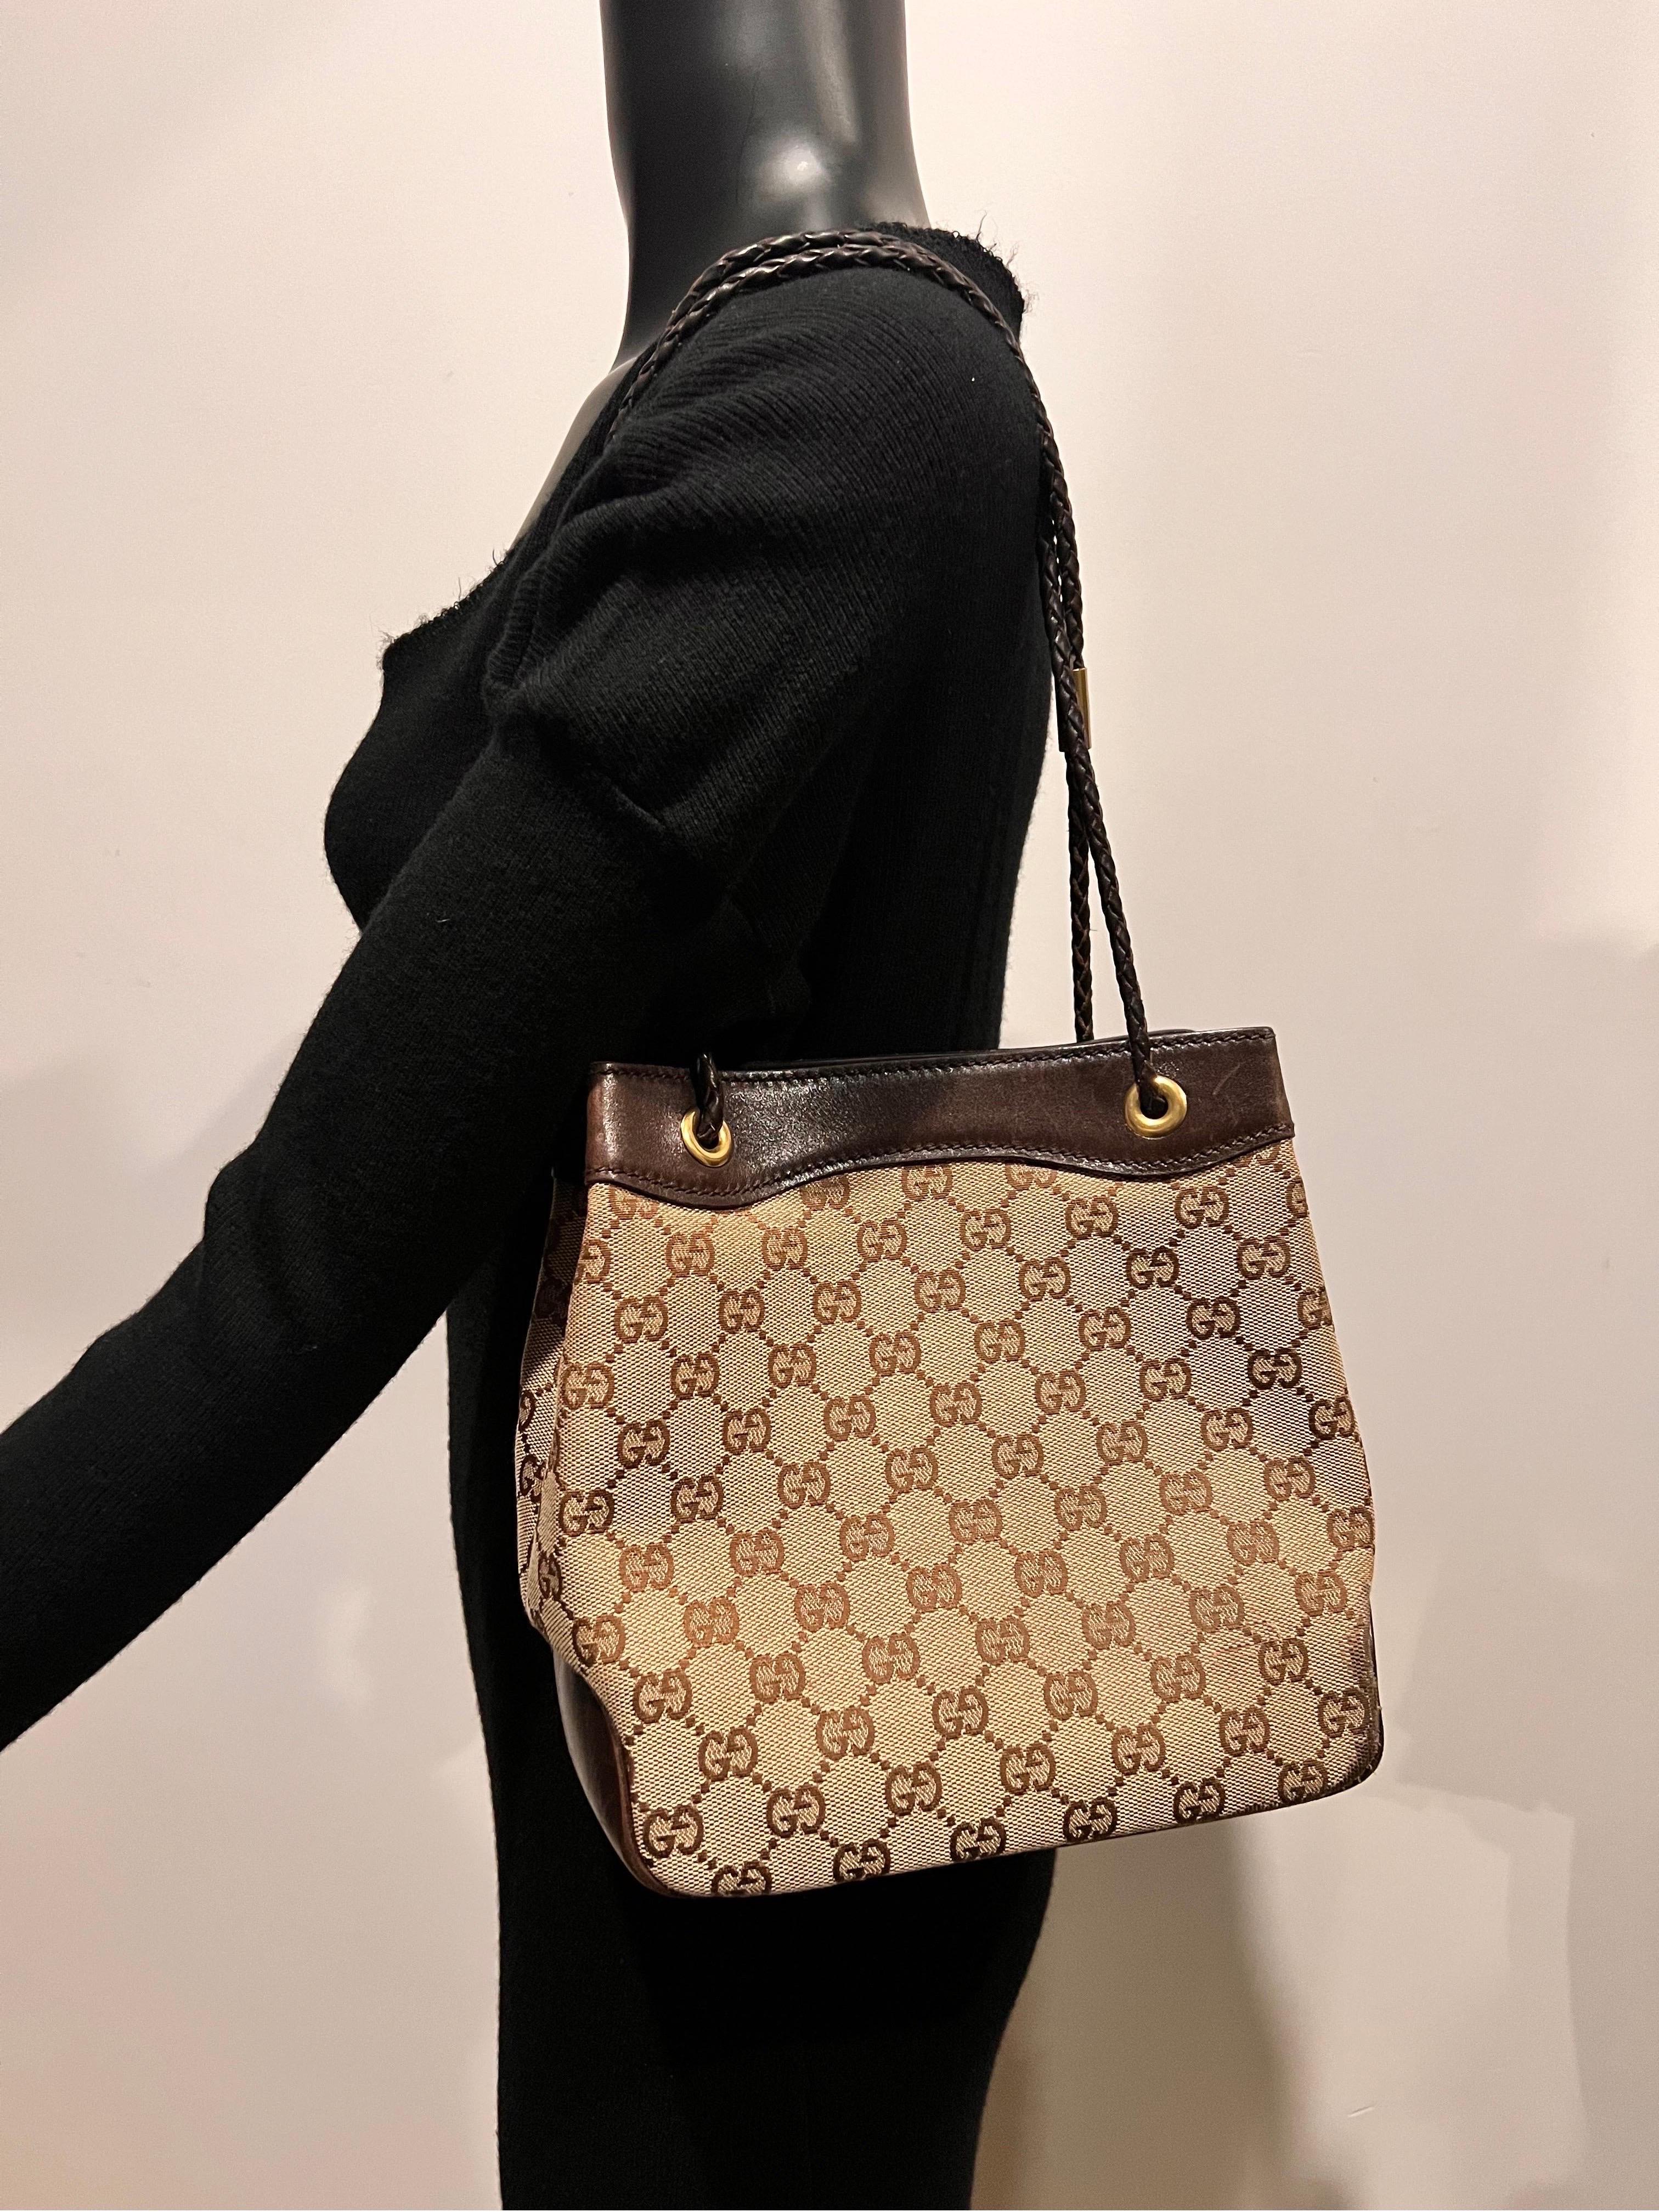 Vintage early 2000’s monogram print GG GUCCI bucket bag in tan colour. Gold hardware detail 
From this exciting era of GUCCI it epitomises the logo mania that was so the look of it’s time.
COMES WITH DUST BAG AND BOX.
In good vintage condition with